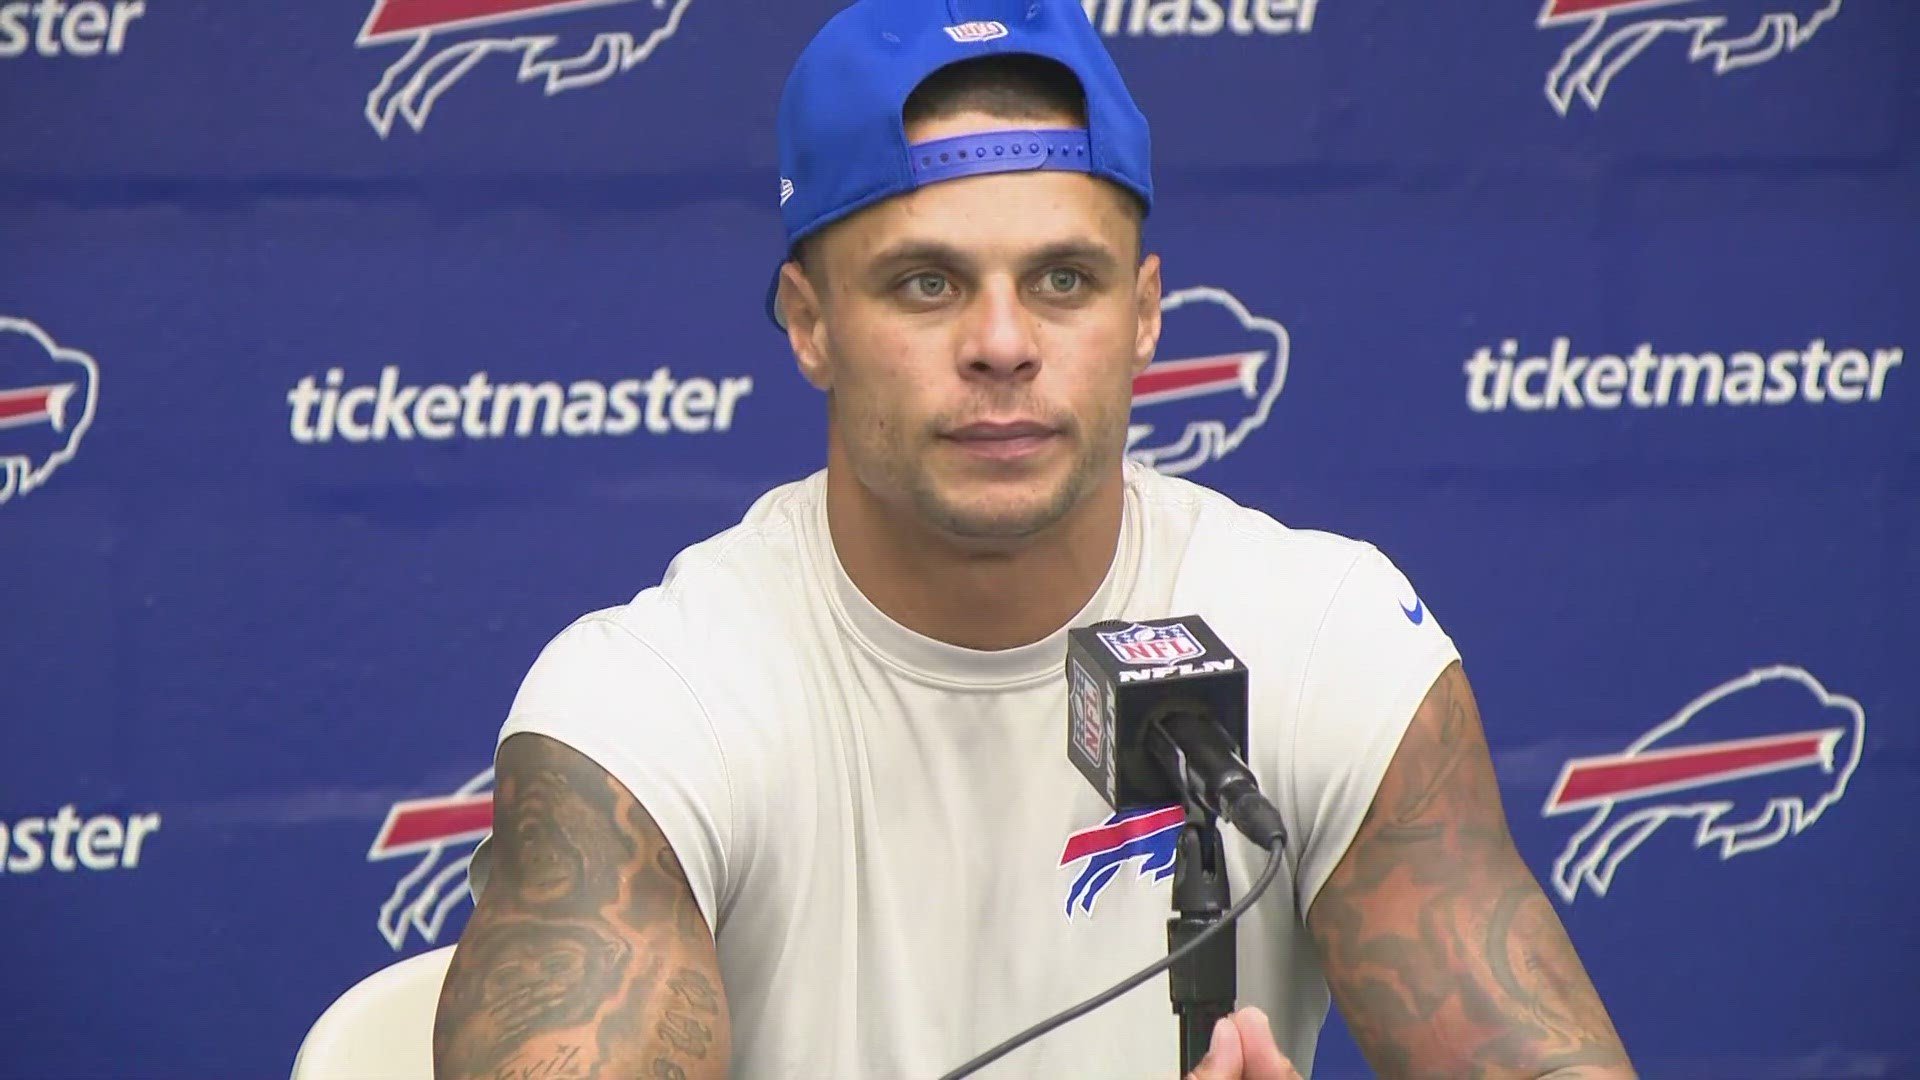 Jordan Poyer spoke at a news conference on Thursday, ahead of a Week 2 home game vs. the Las Vegas Raiders.